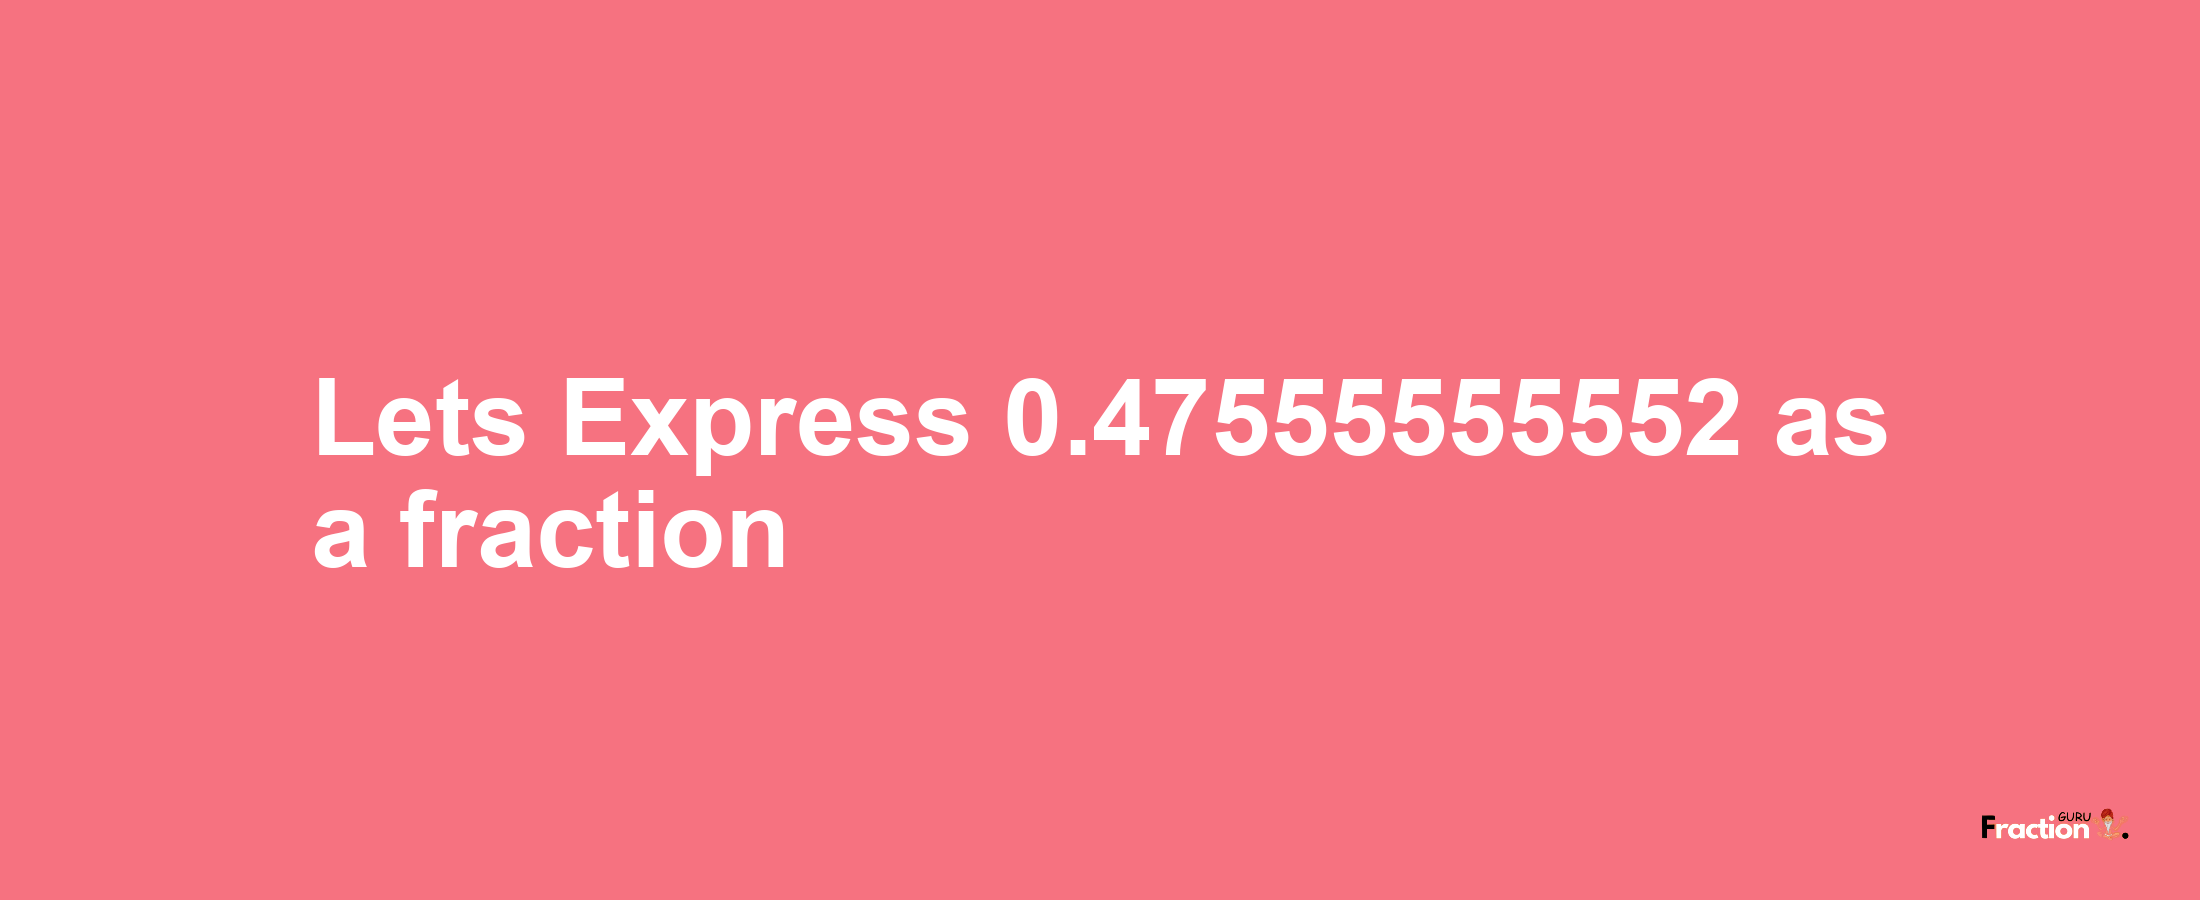 Lets Express 0.47555555552 as afraction